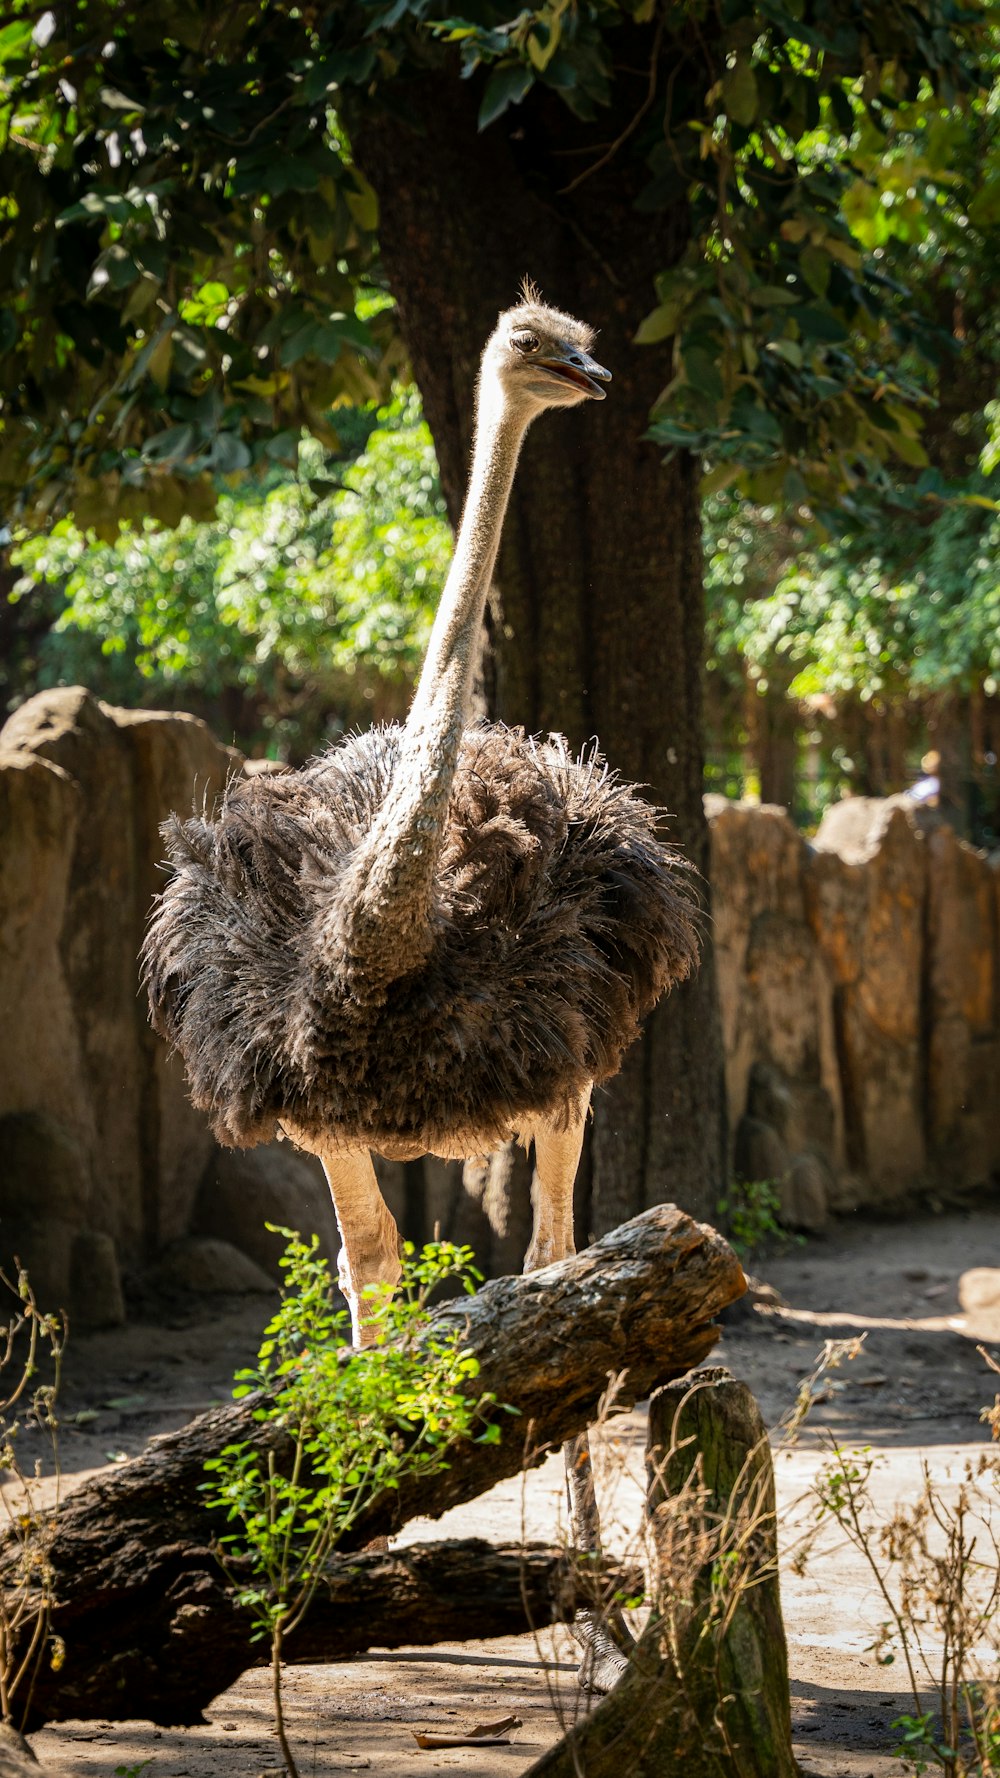 an ostrich standing on a log in a zoo enclosure